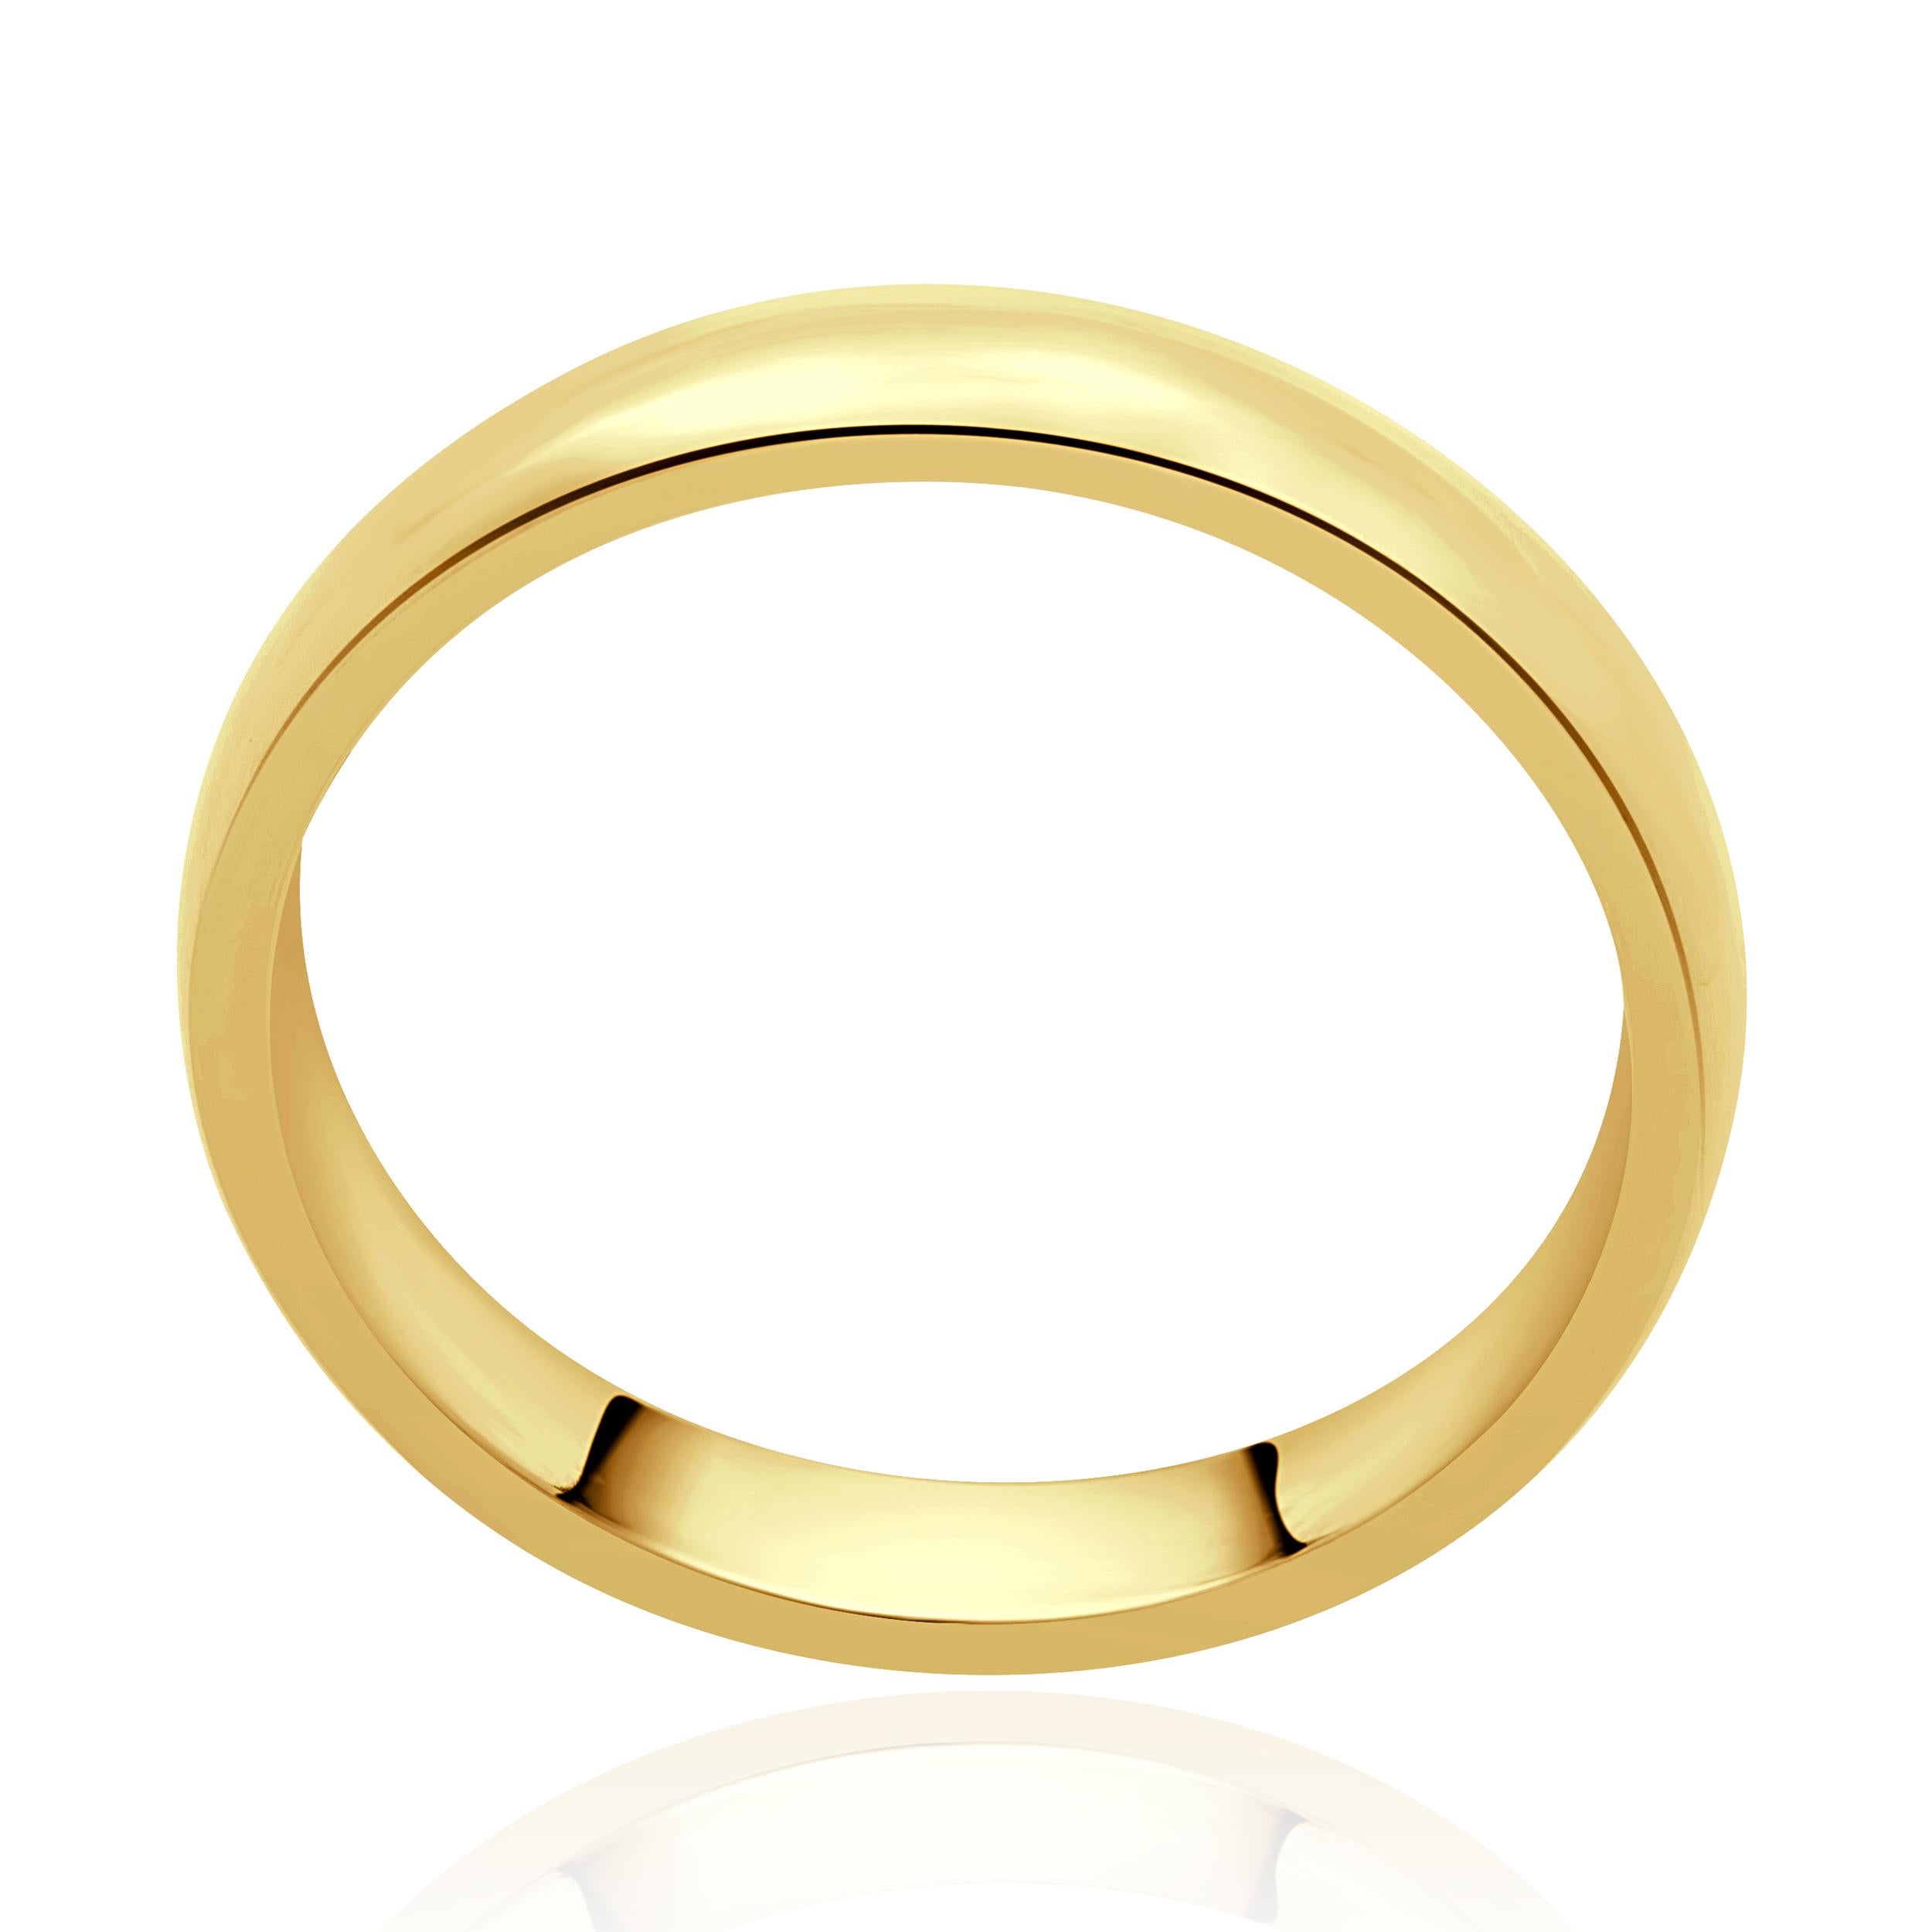 Tiffany & Co. 18 Karat Yellow Gold 5MM Band In Excellent Condition For Sale In Scottsdale, AZ